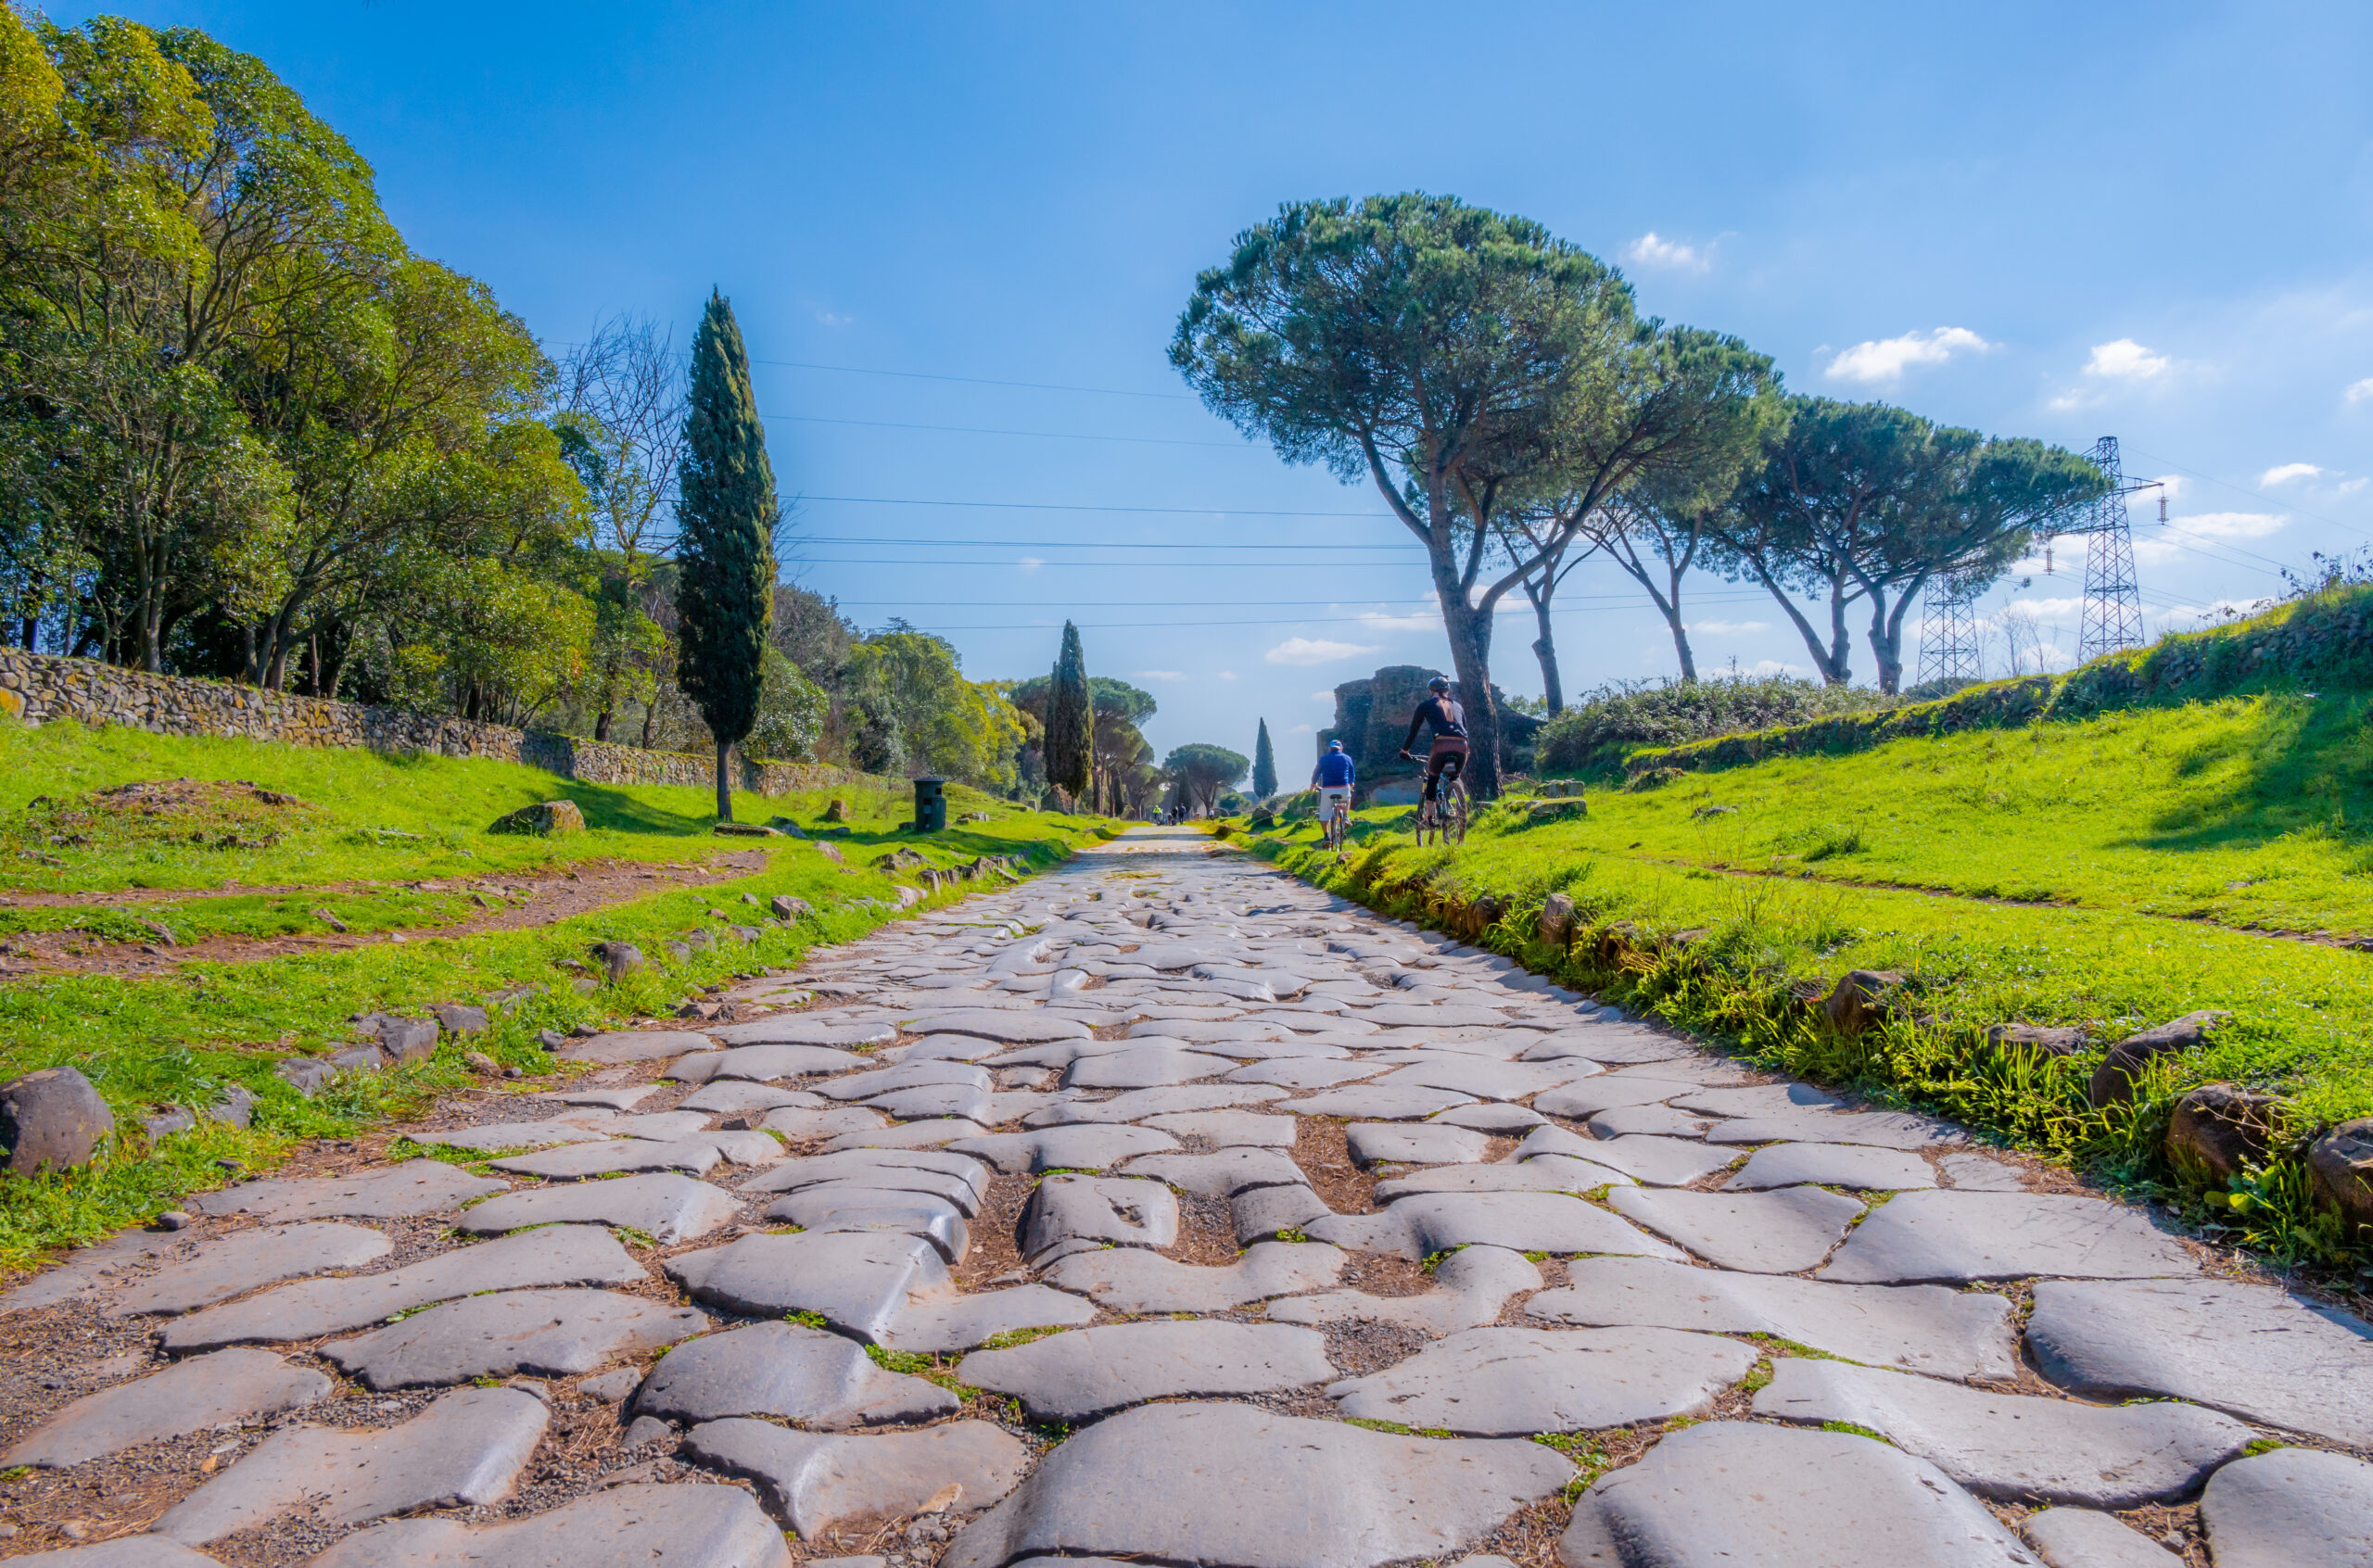 View of the worn cobbles and beautiful old trees of the Appian Way in Rome